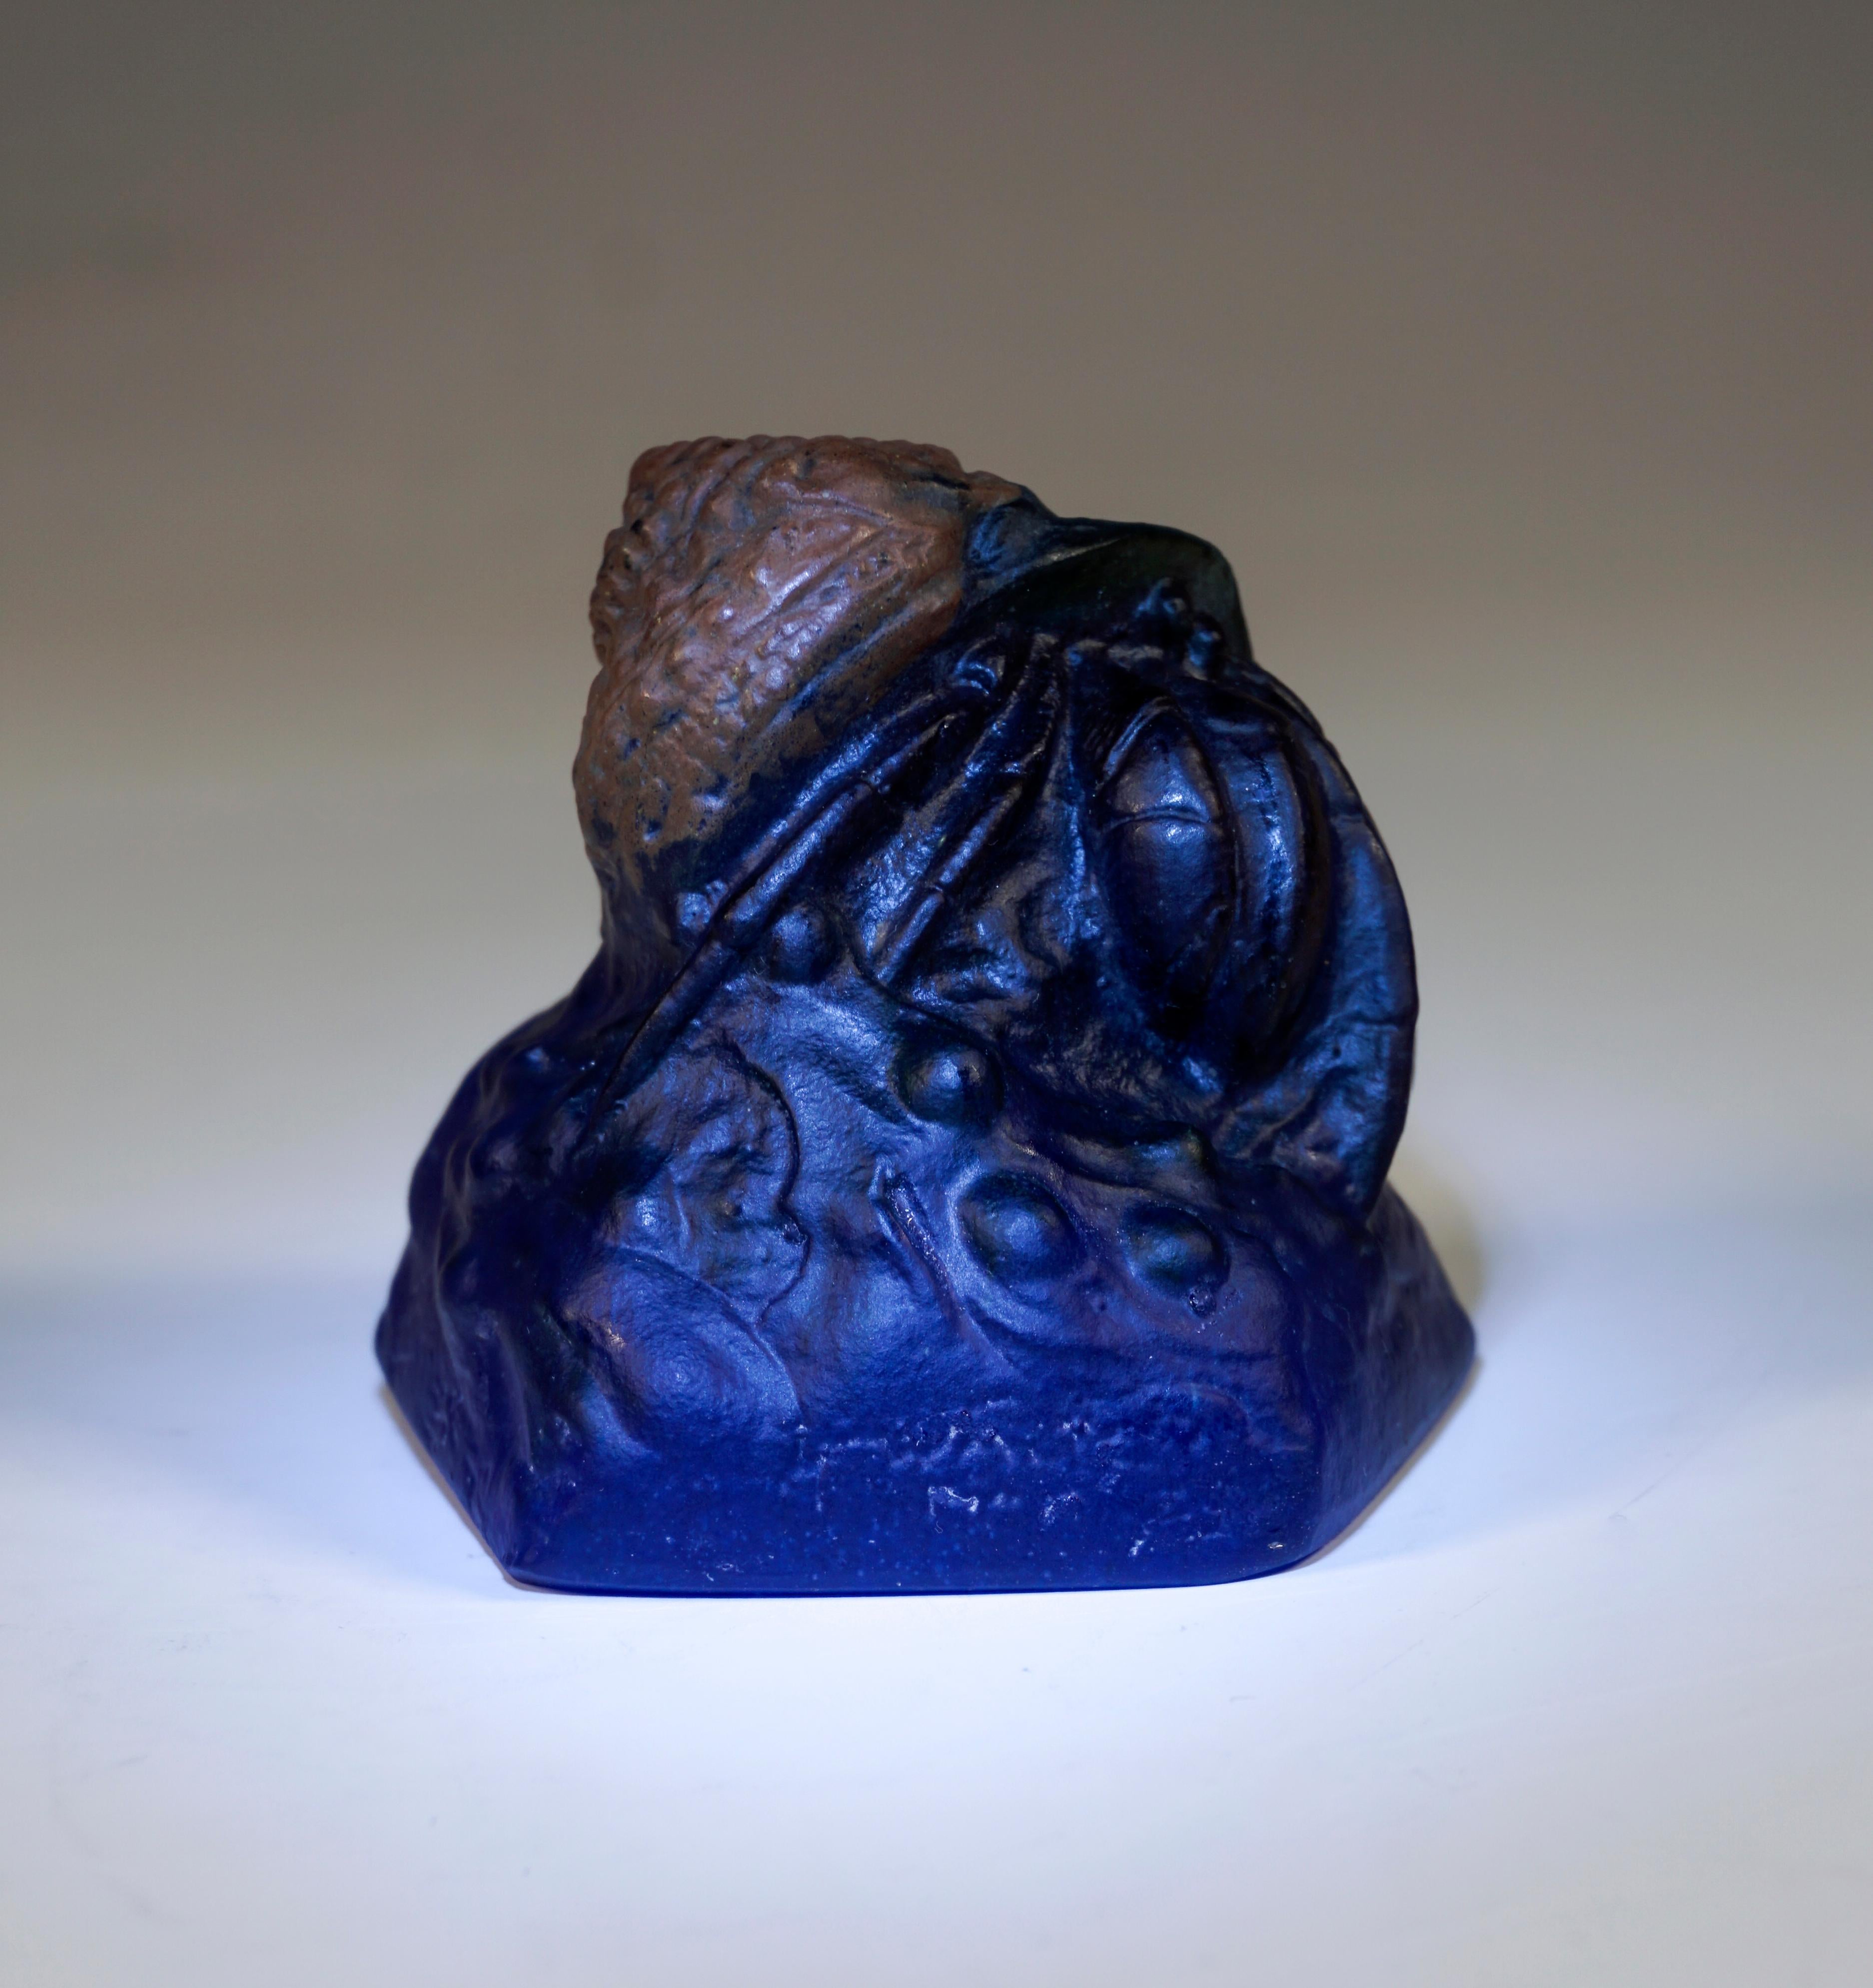 Pâte de Verre Paperweight 'Bernard l'Heremite':
Hermit crab in shades of black-brown and green with brown snail shell on dark blue seabed base with pentagonal plan. Signed 'Bergé' and 'AWALTER' on the sides.

Manufactory: Amalric Walter & Henri